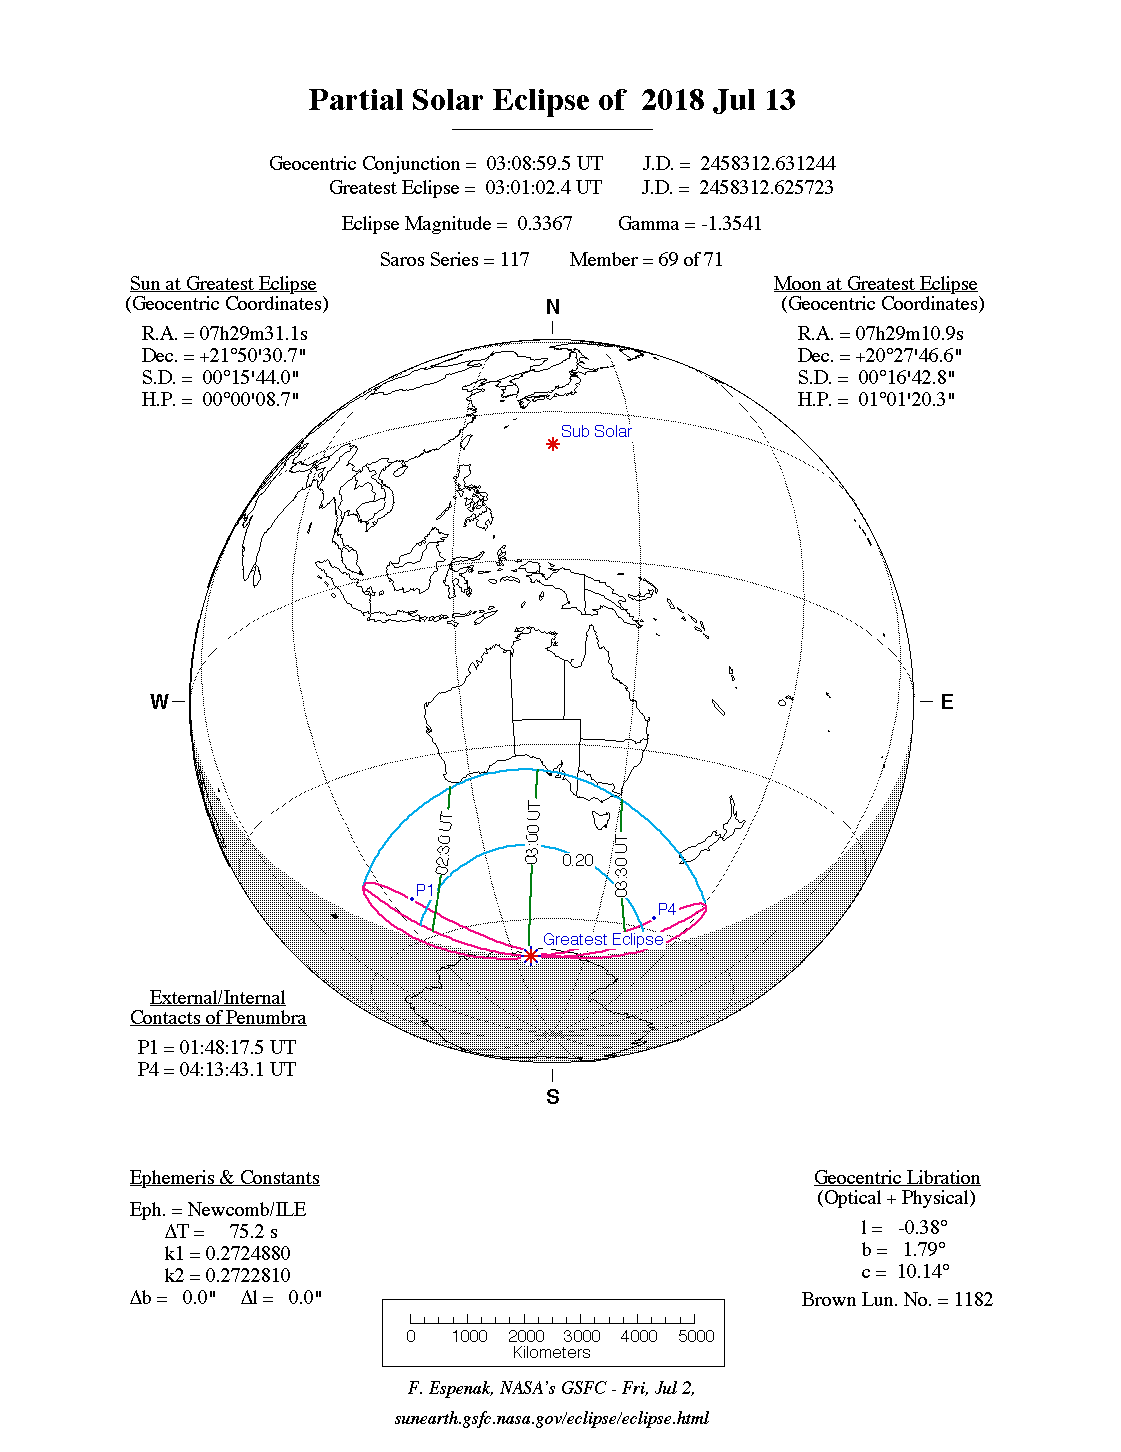 Information of the Greatest Eclipse